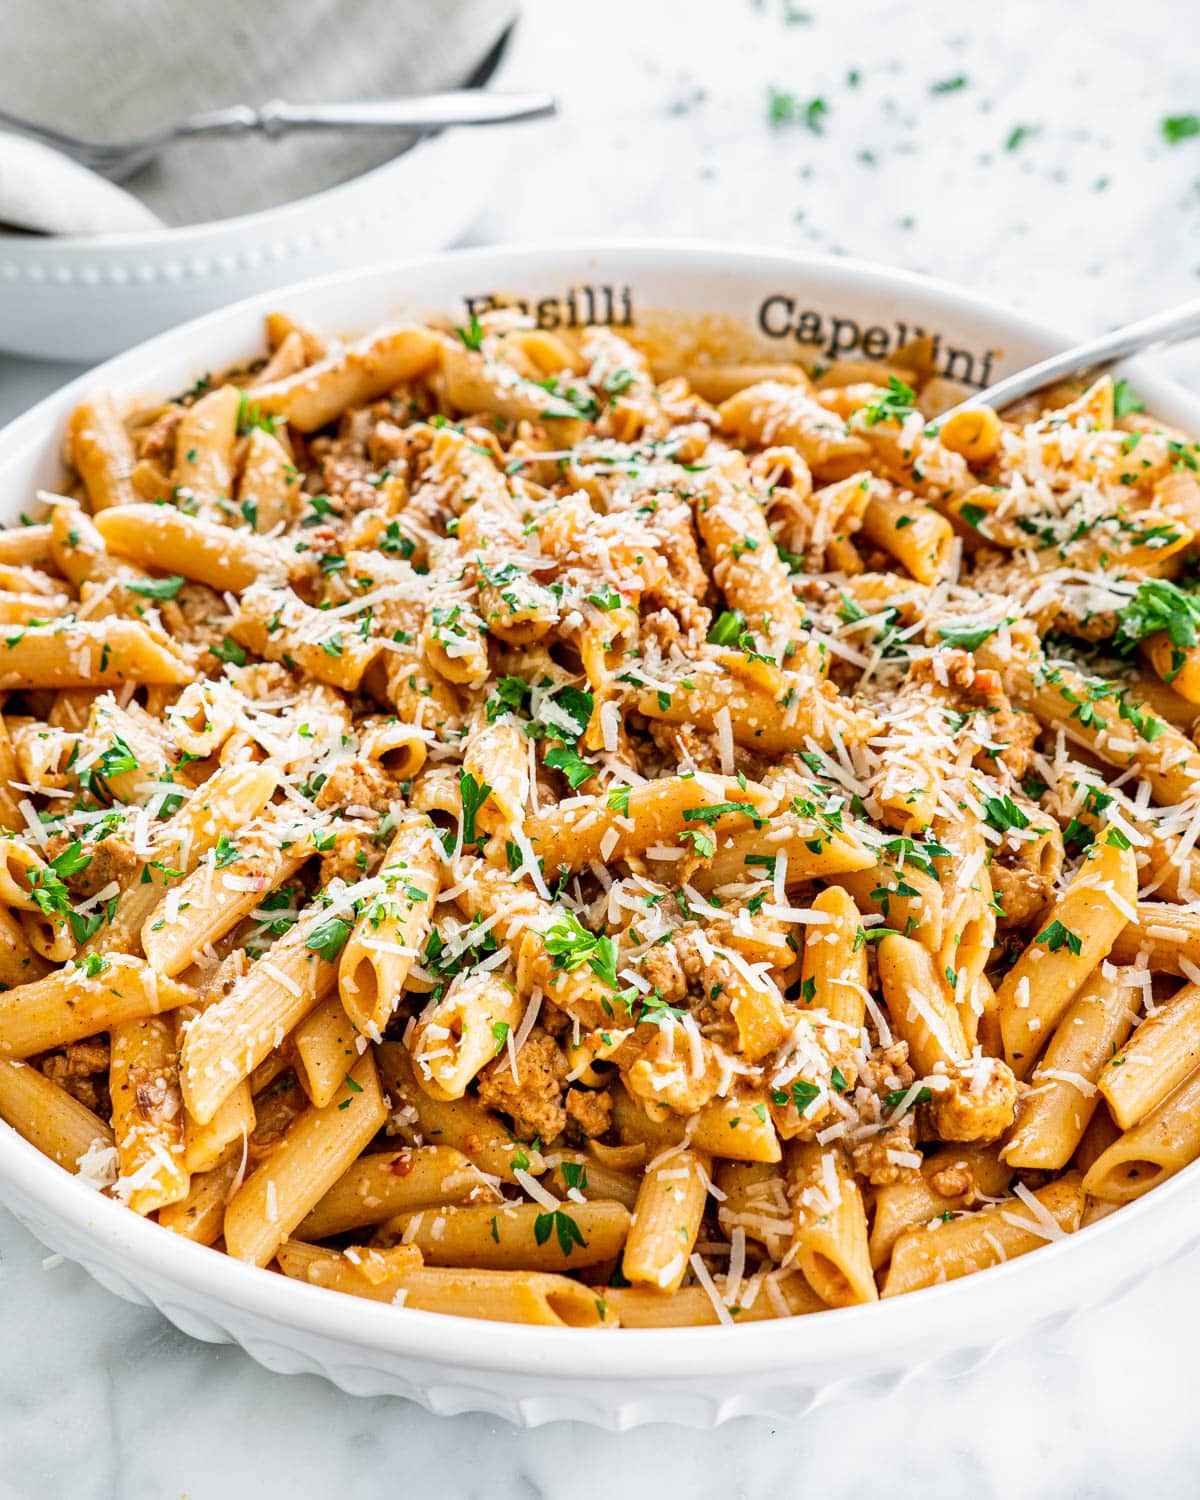 sausage pasta in a large pasta bowl garnished with parsley and parmesan cheese